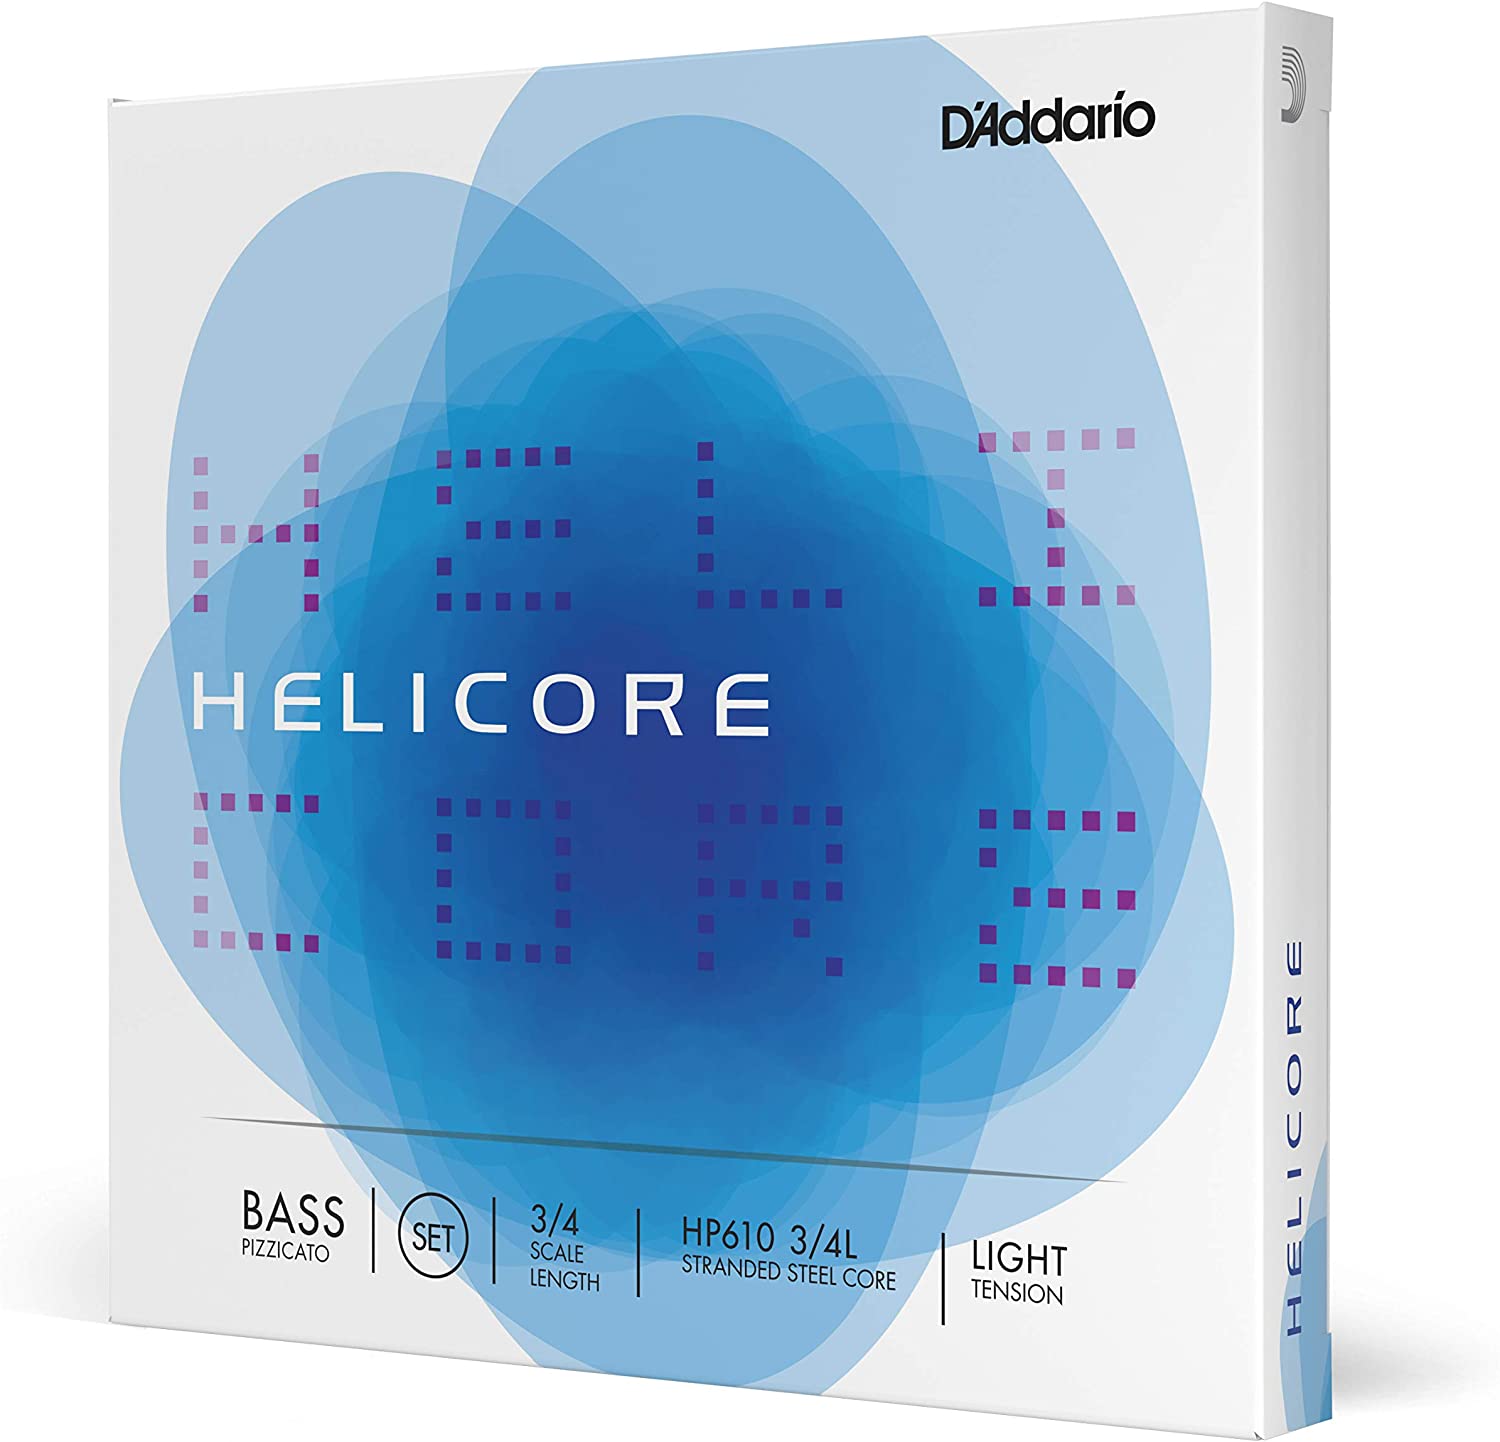 D'Addario Helicore Pizzicato Bass String Set on a white background